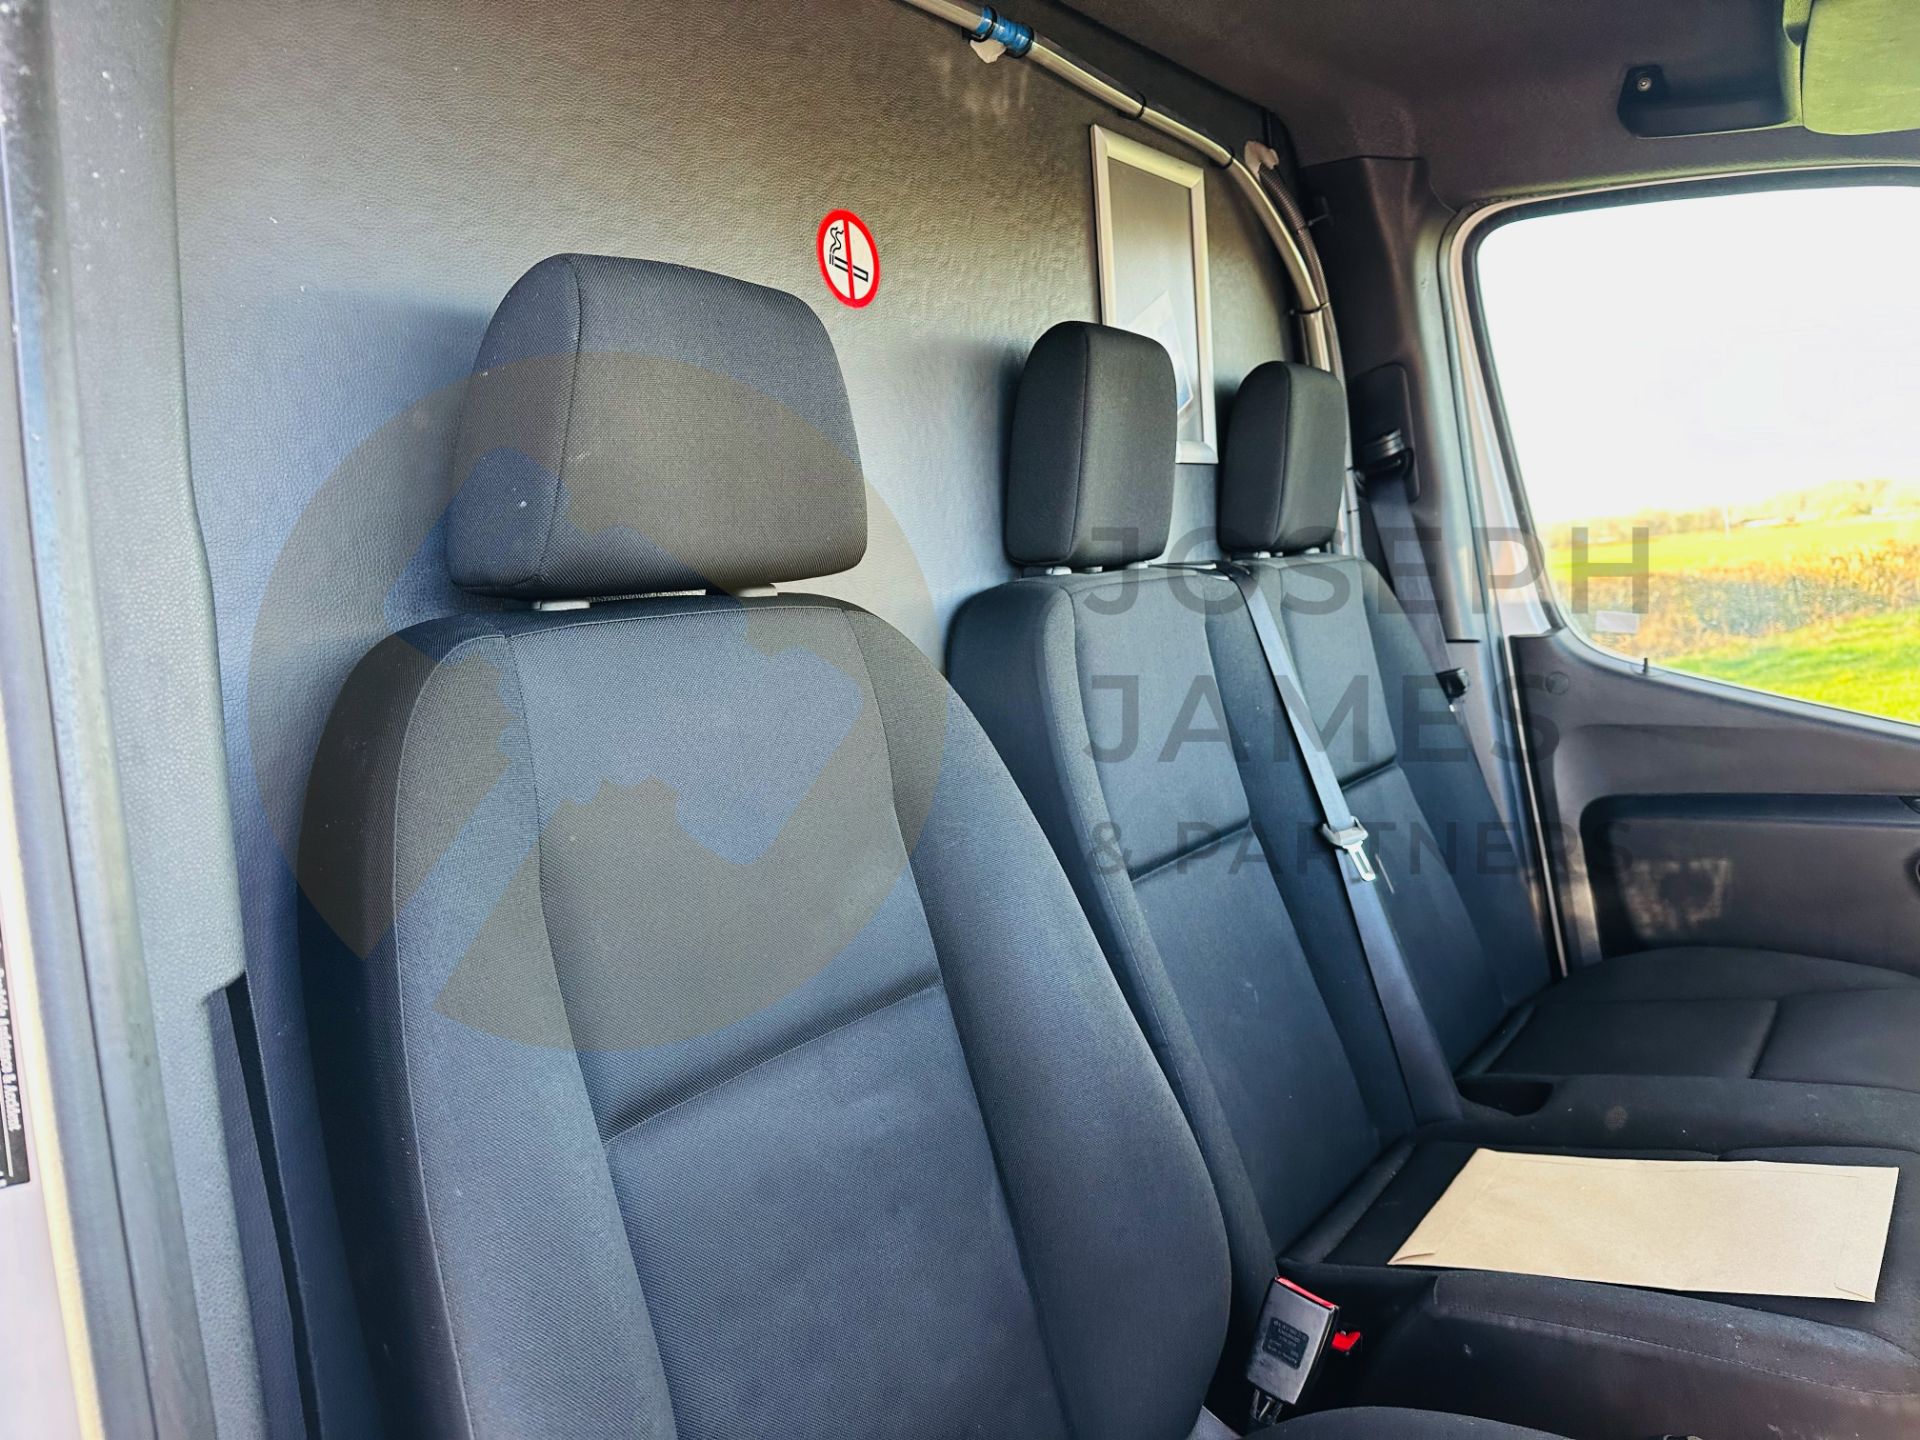 MERCEDES-BENZ SPRINTER 314 CDI *MWB - REFRIGERATED VAN* (2019 - FACELIFT MODEL) *AIR CONDITIONING* - Image 15 of 30